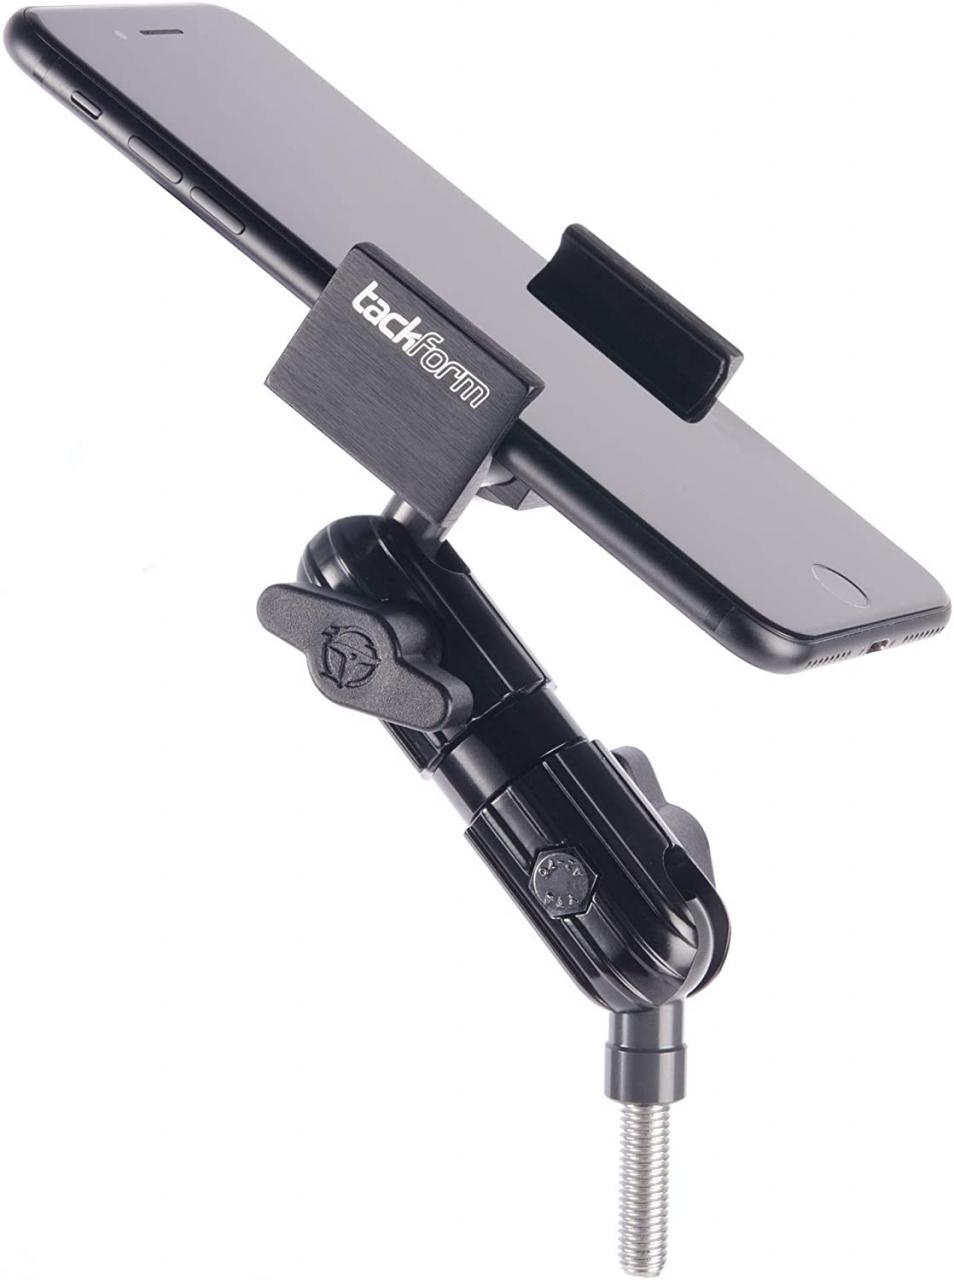 Buy M8 Bar Clamp Motorcycle Phone Mount - TACKFORM Enduro Series - Perfect  for Handlebar Clamp Bolts. All Metal Construction. Works with most all  motorcycles and dirt bikes, with M8 handlebar bolt